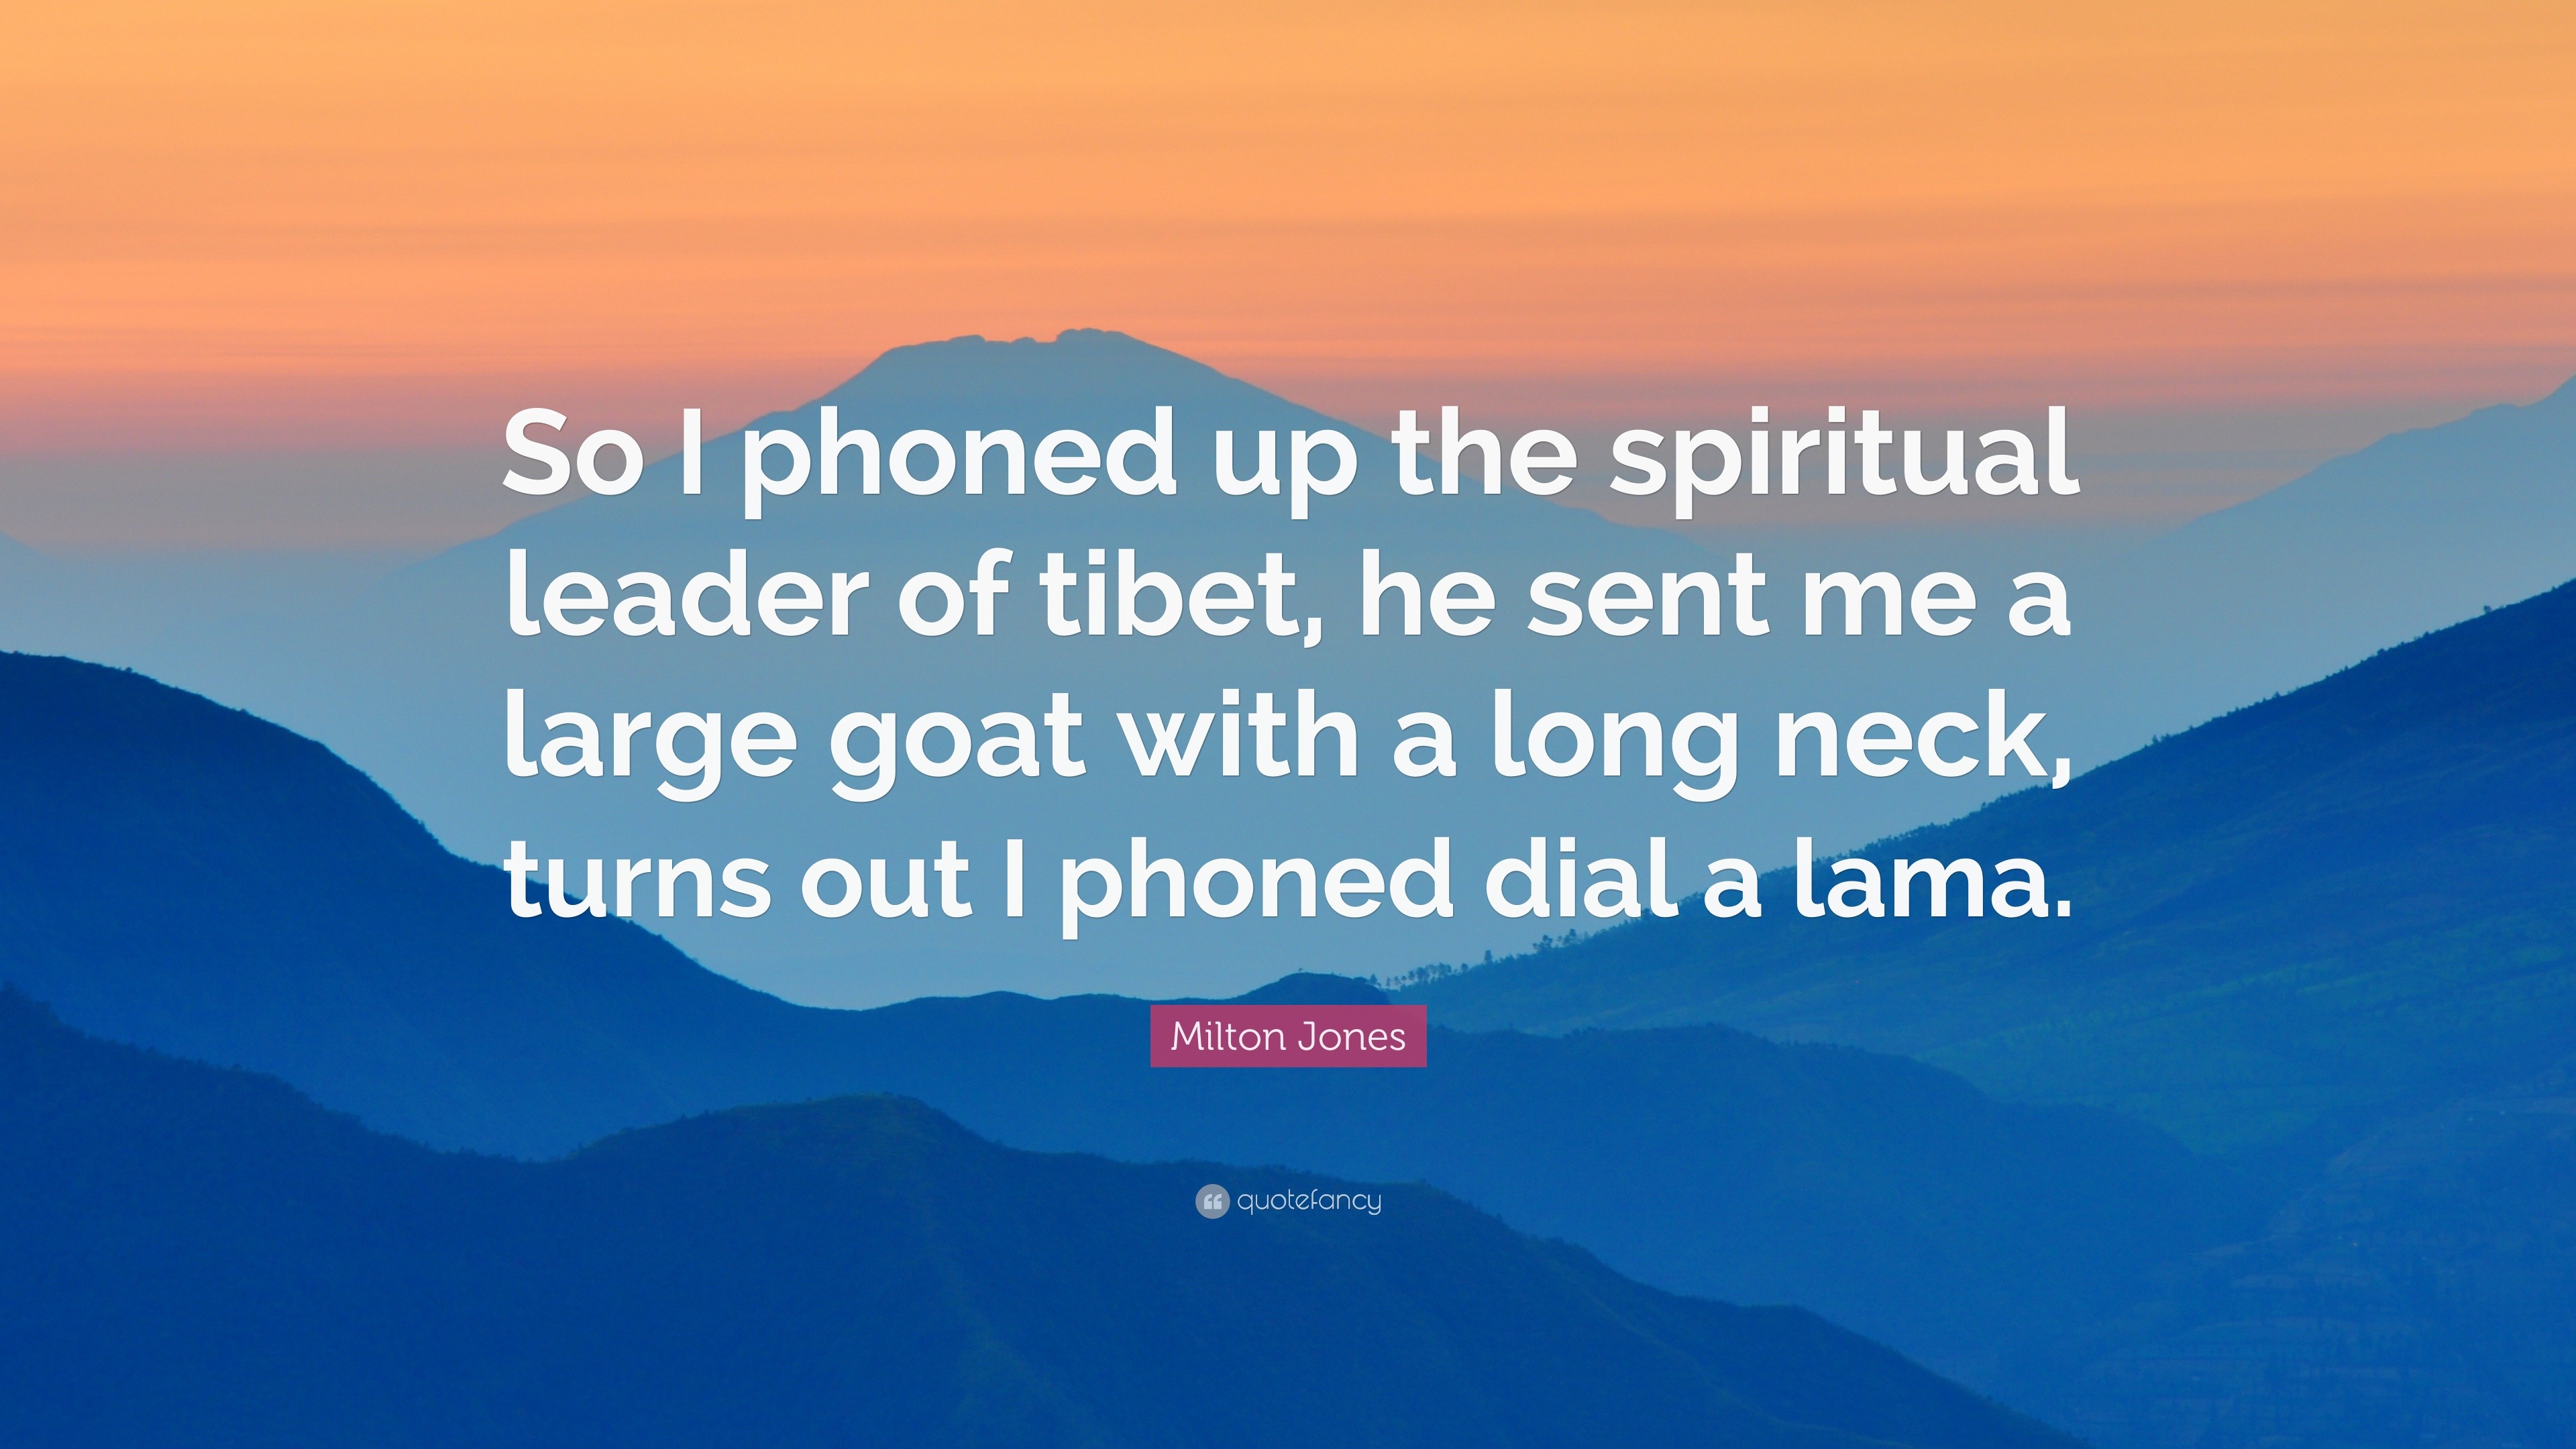 So I phoned up the spiritual leader of tibet, he sent me a large goat with ...